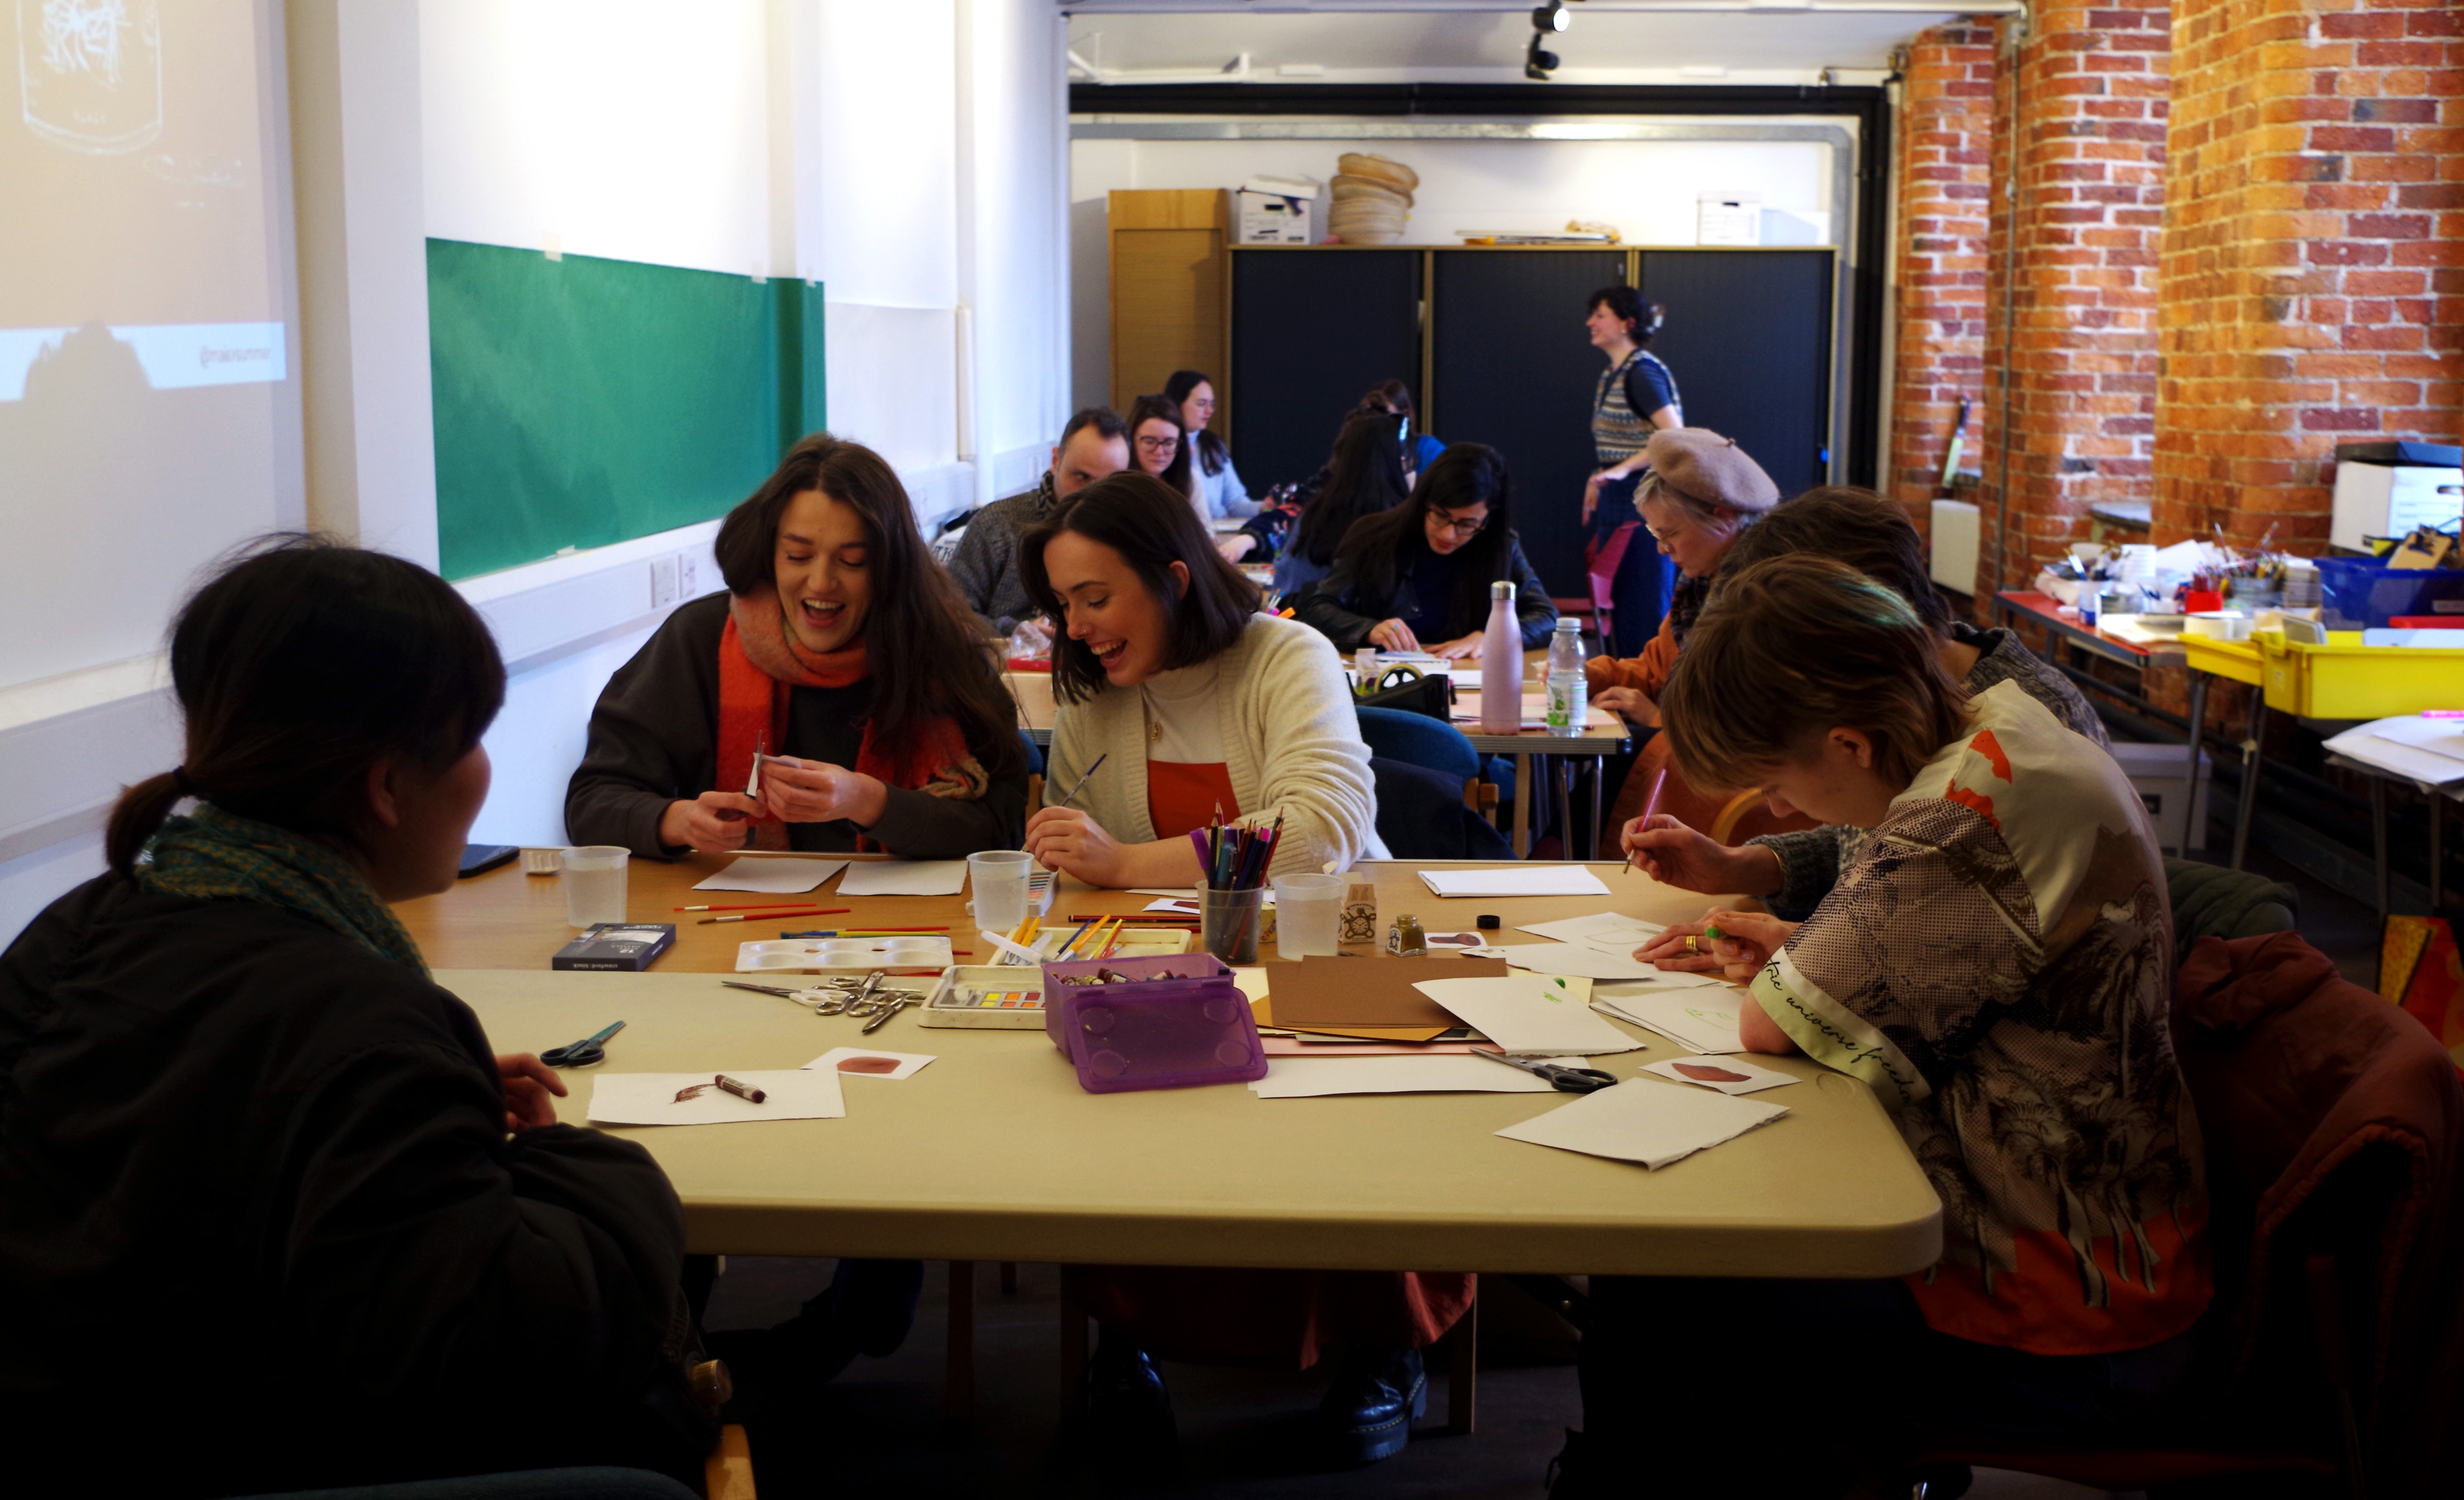 Drawing the Archive: Illustration workshop with Maisy Summer